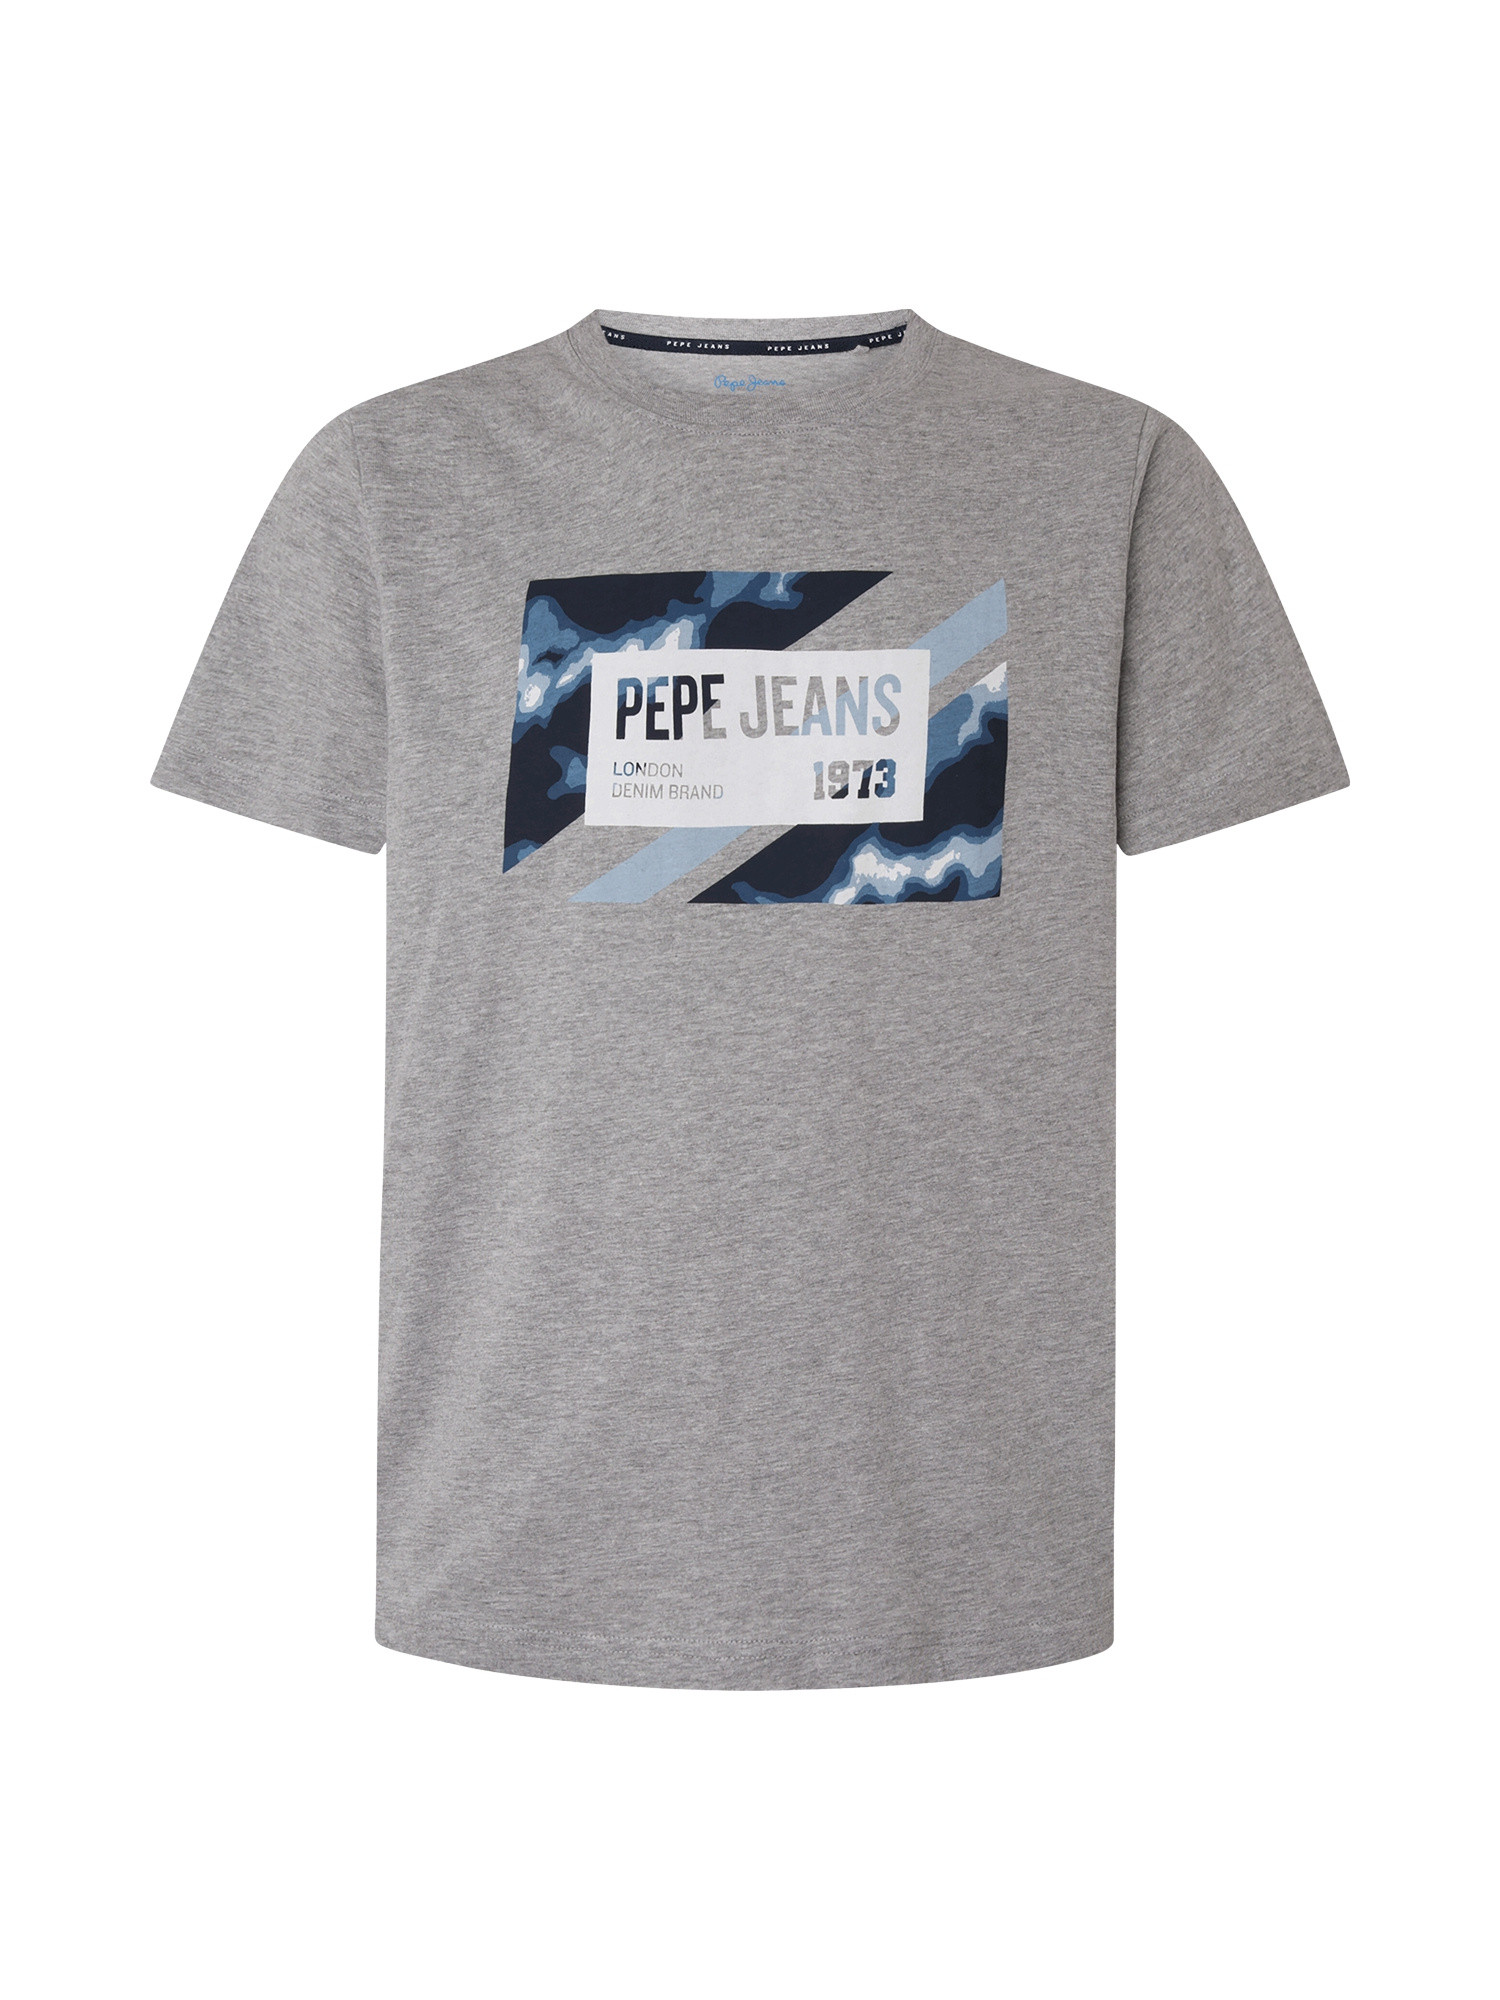 Pepe Jeans - T-shirt con stampa in cotone, Grigio chiaro, large image number 0